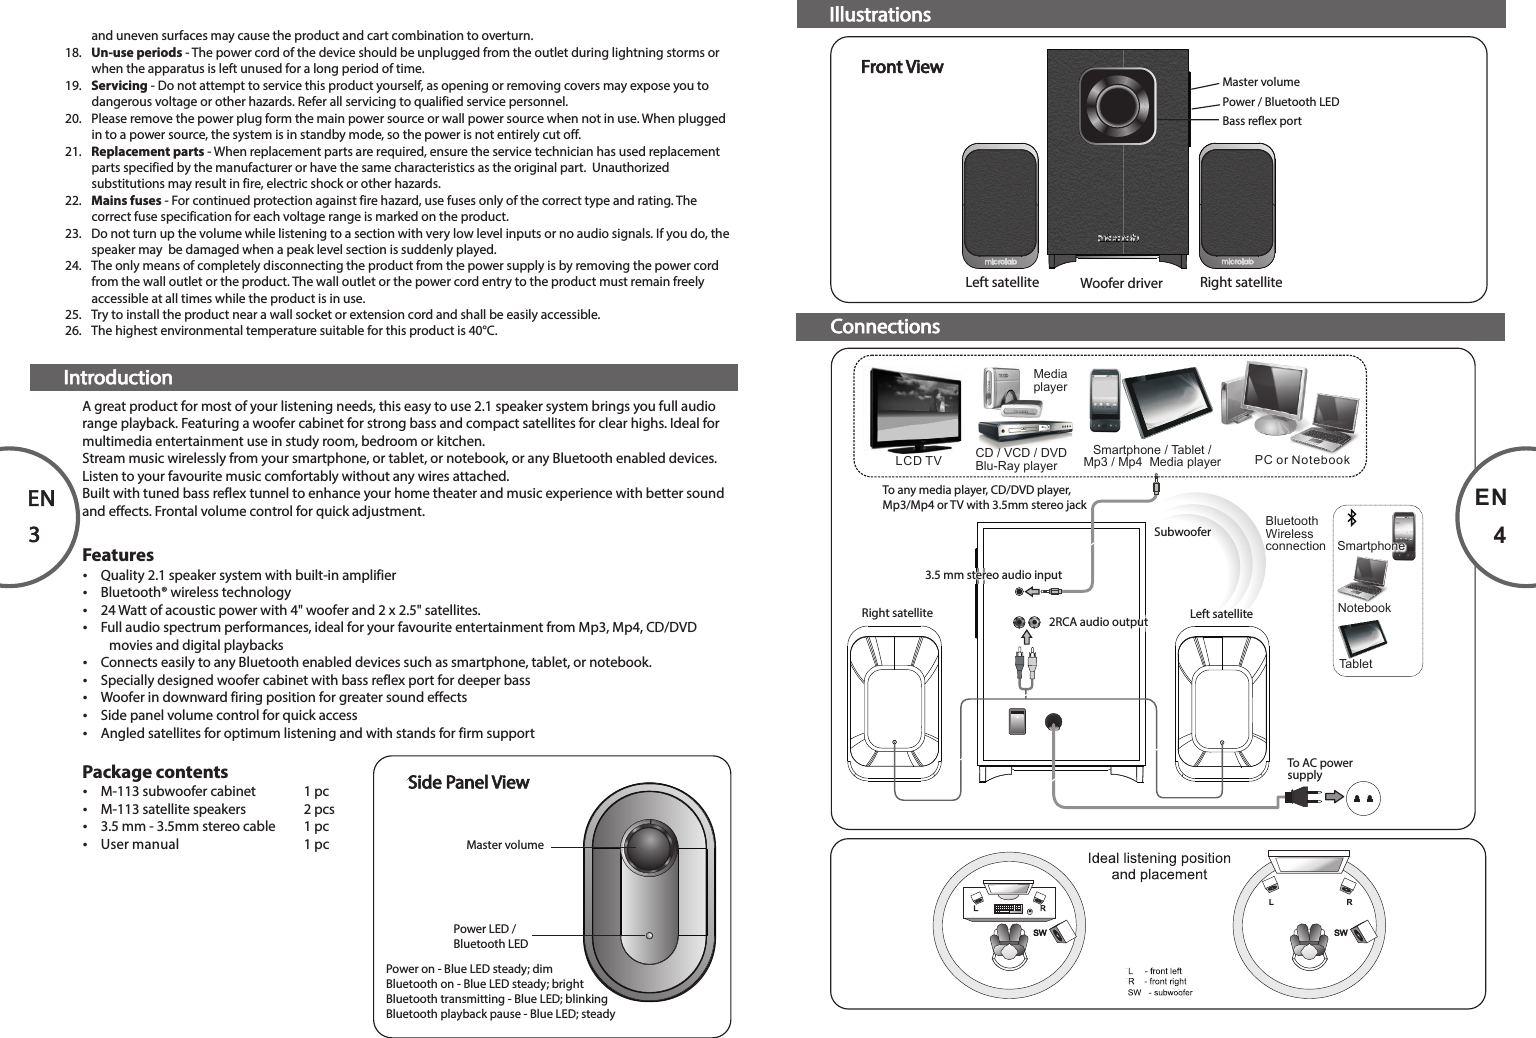 Page 3 of Microlab Electronics M-113BT MULTIMEDIA SPEAKER User Manual 